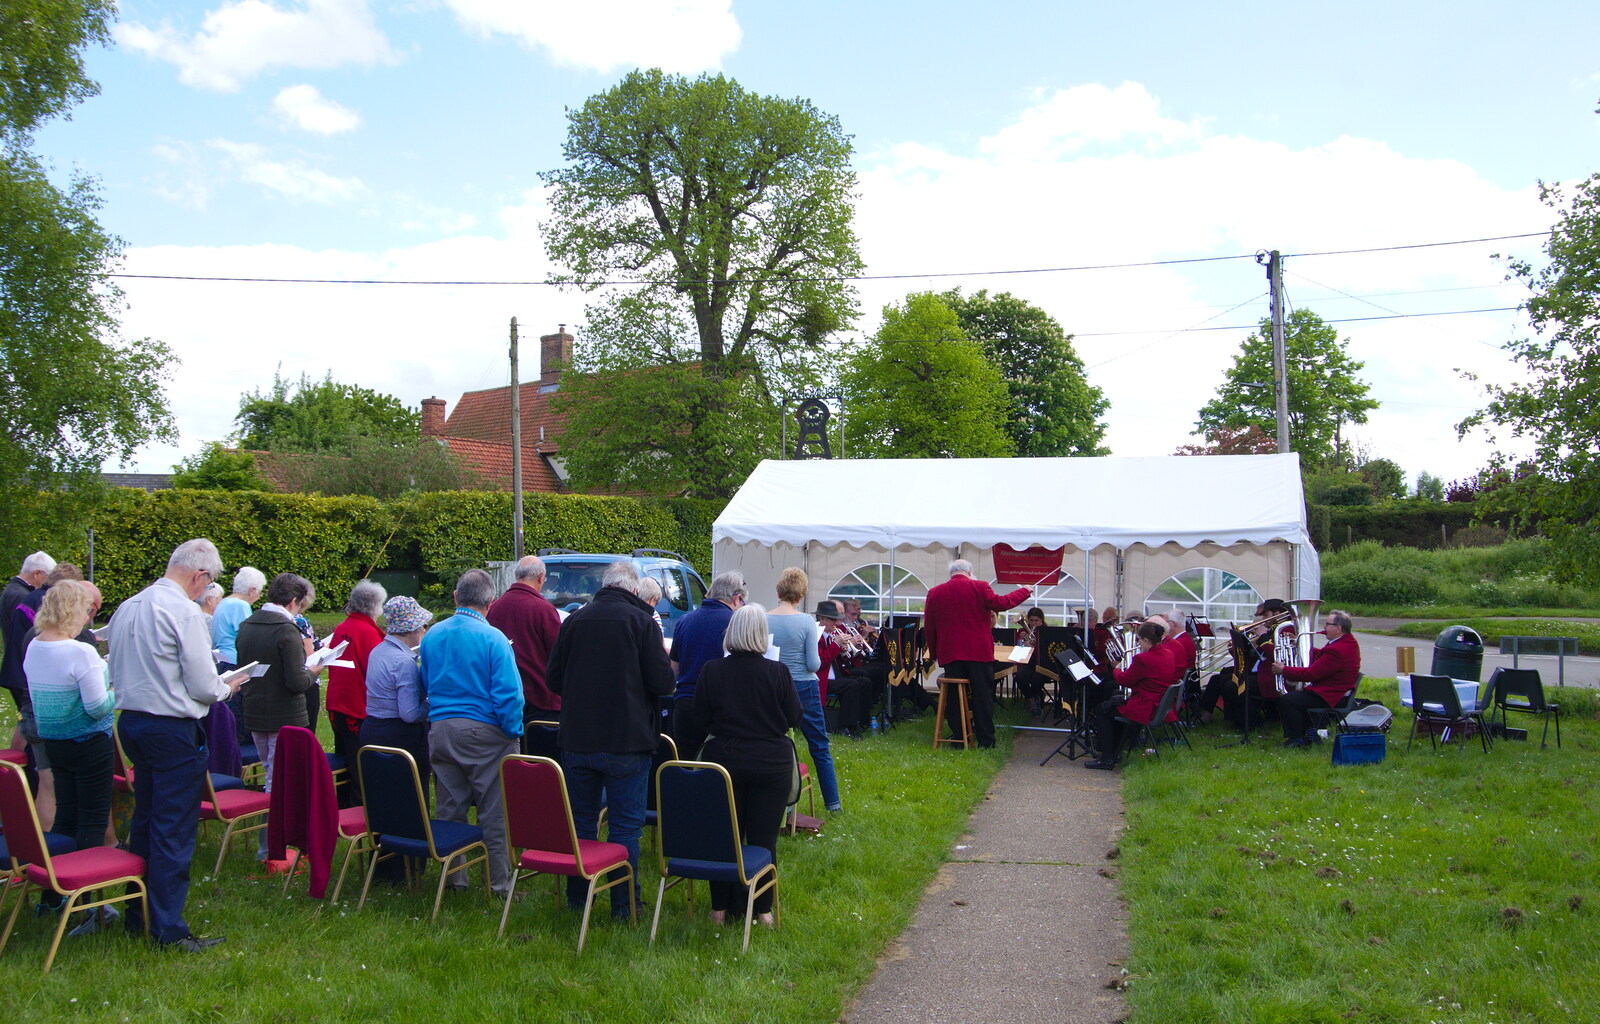 The crowd stands up to sing hymns from The Gislingham Silver Band at the Village Hall, Gislingham, Suffolk - 12th May 2019